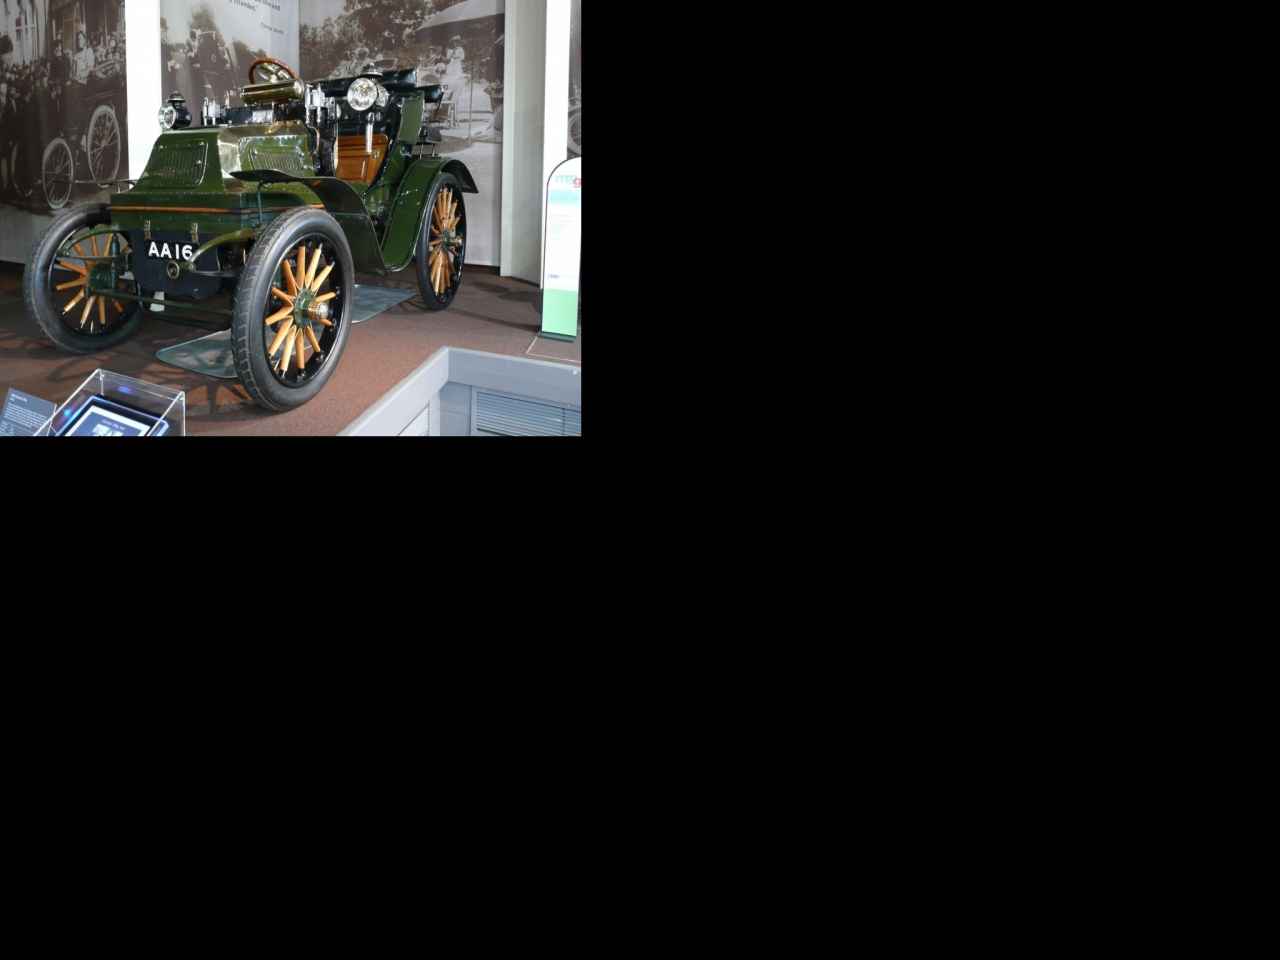 Free Download 1280x960 Resolution of High-def daimler 12 hp ...